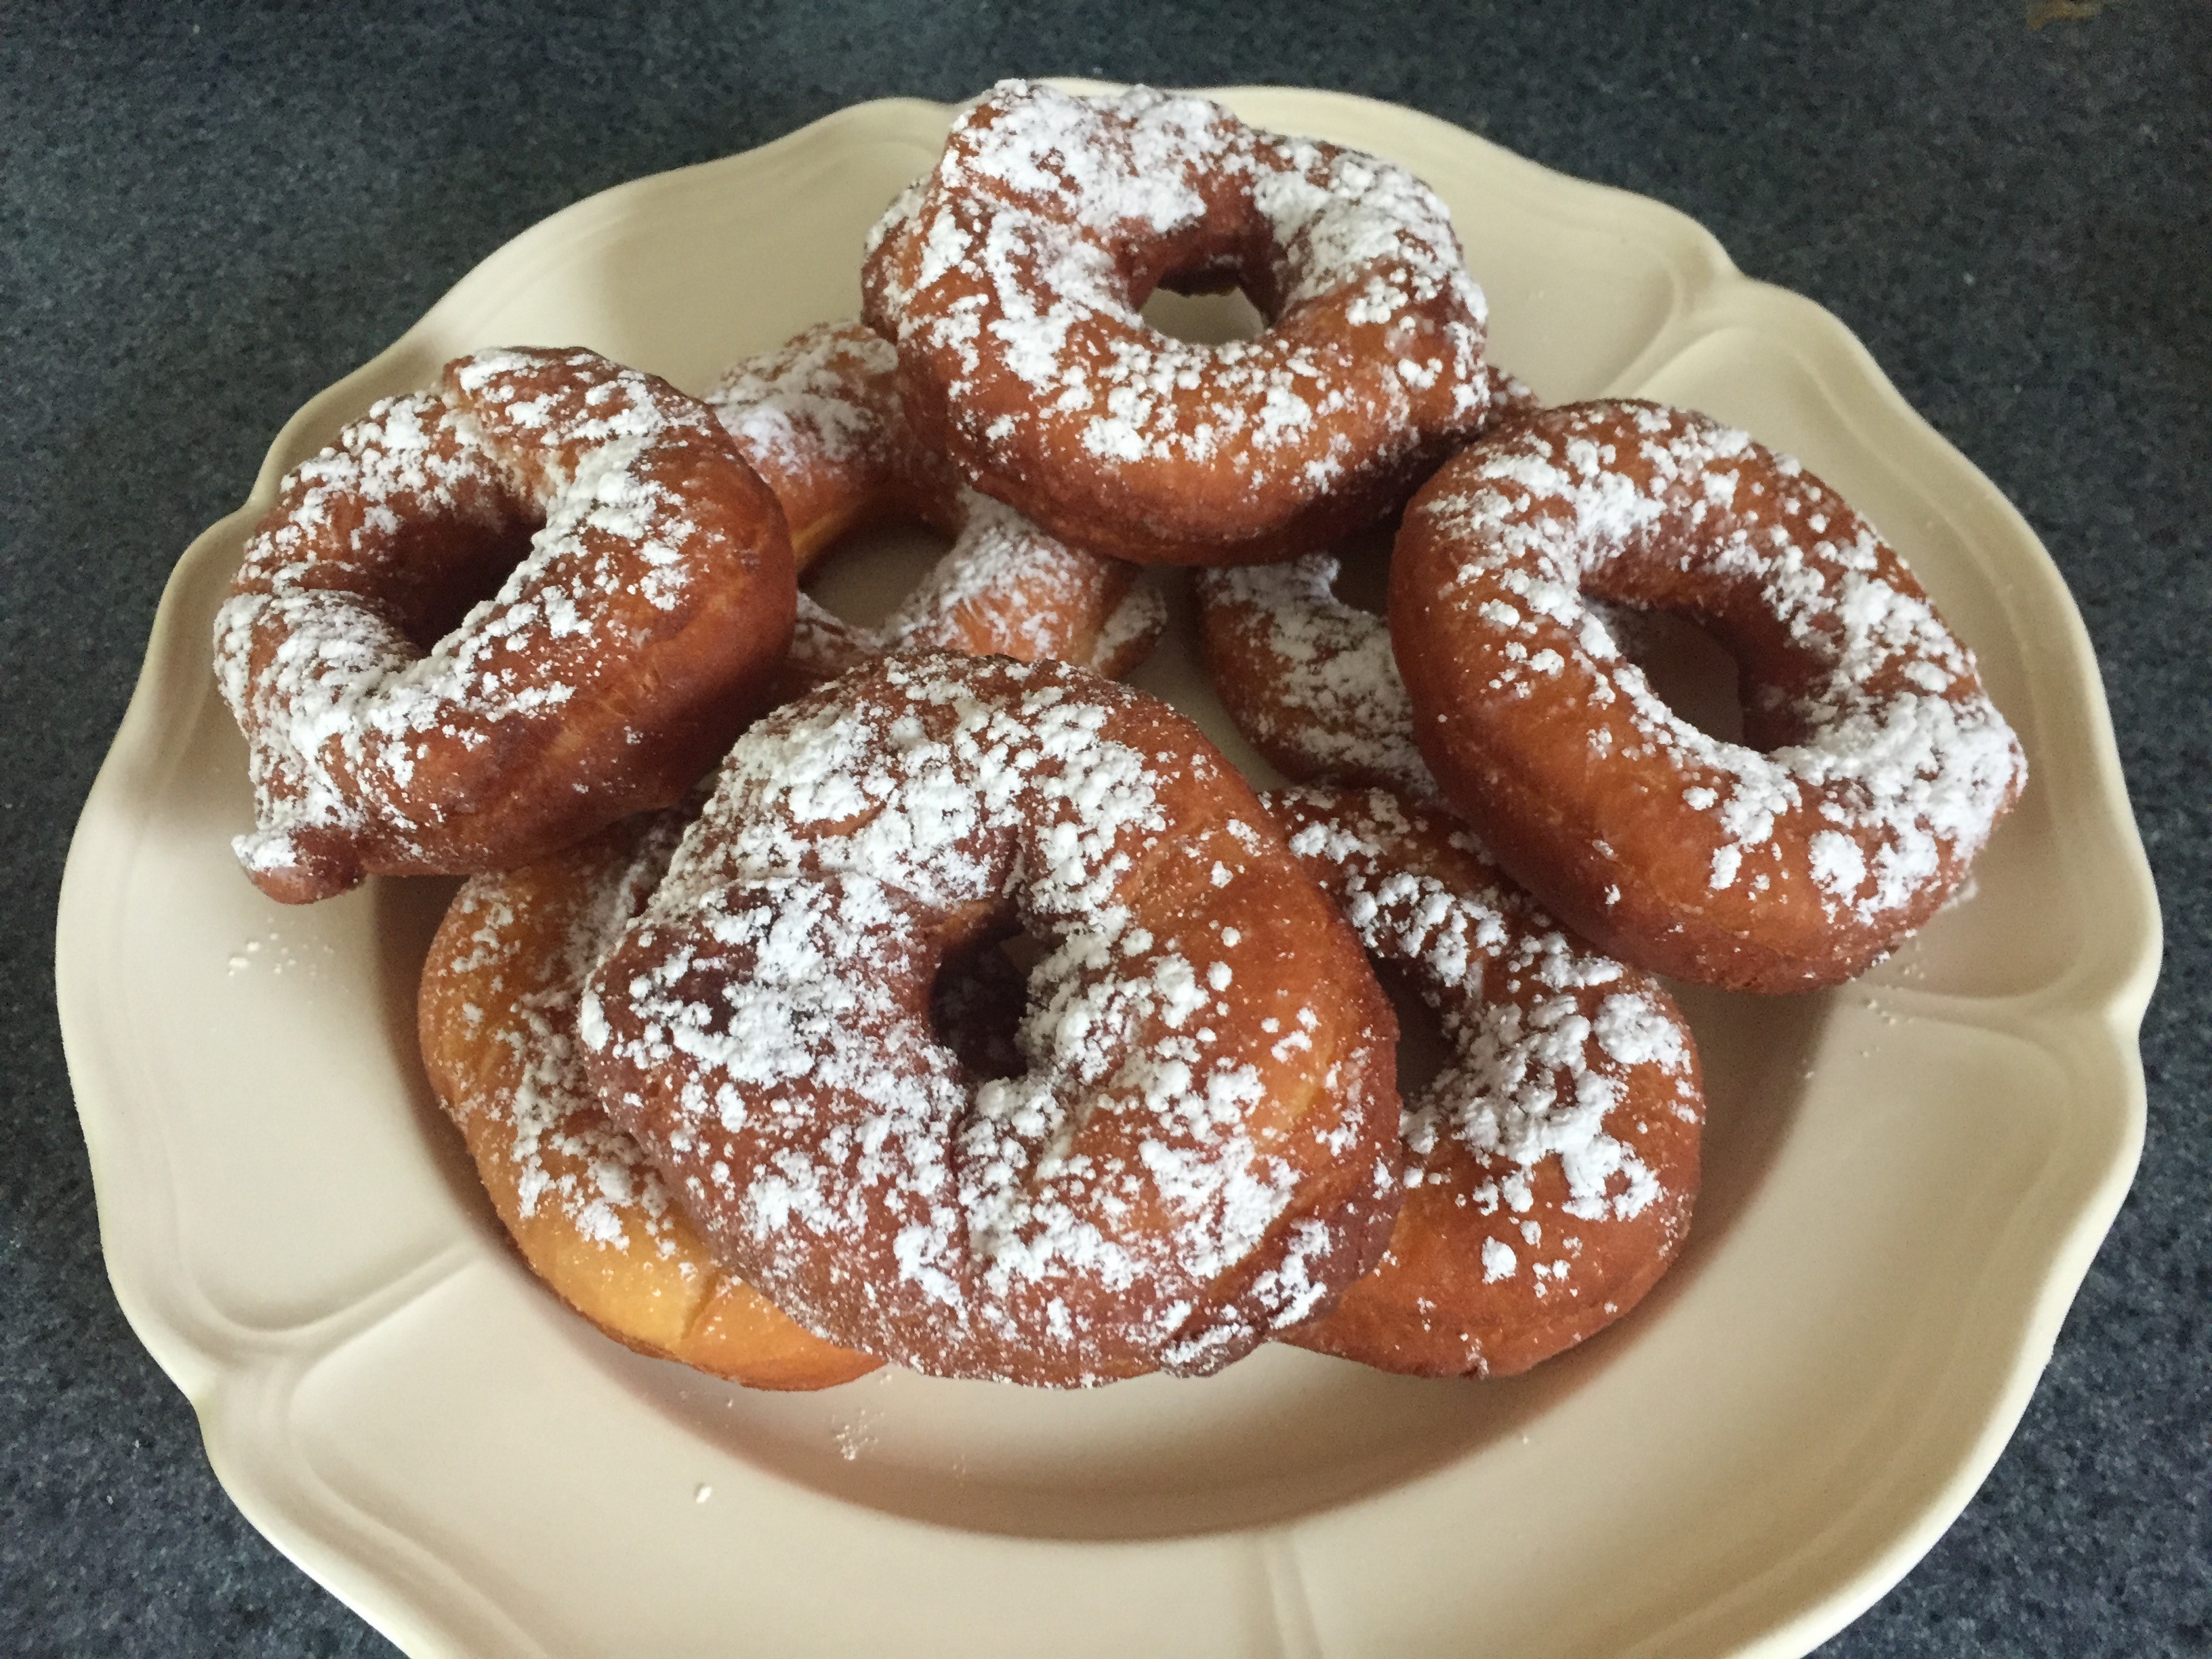 8 freshly baked donuts dusted with confectioner's sugar set on a white ceramic plate.